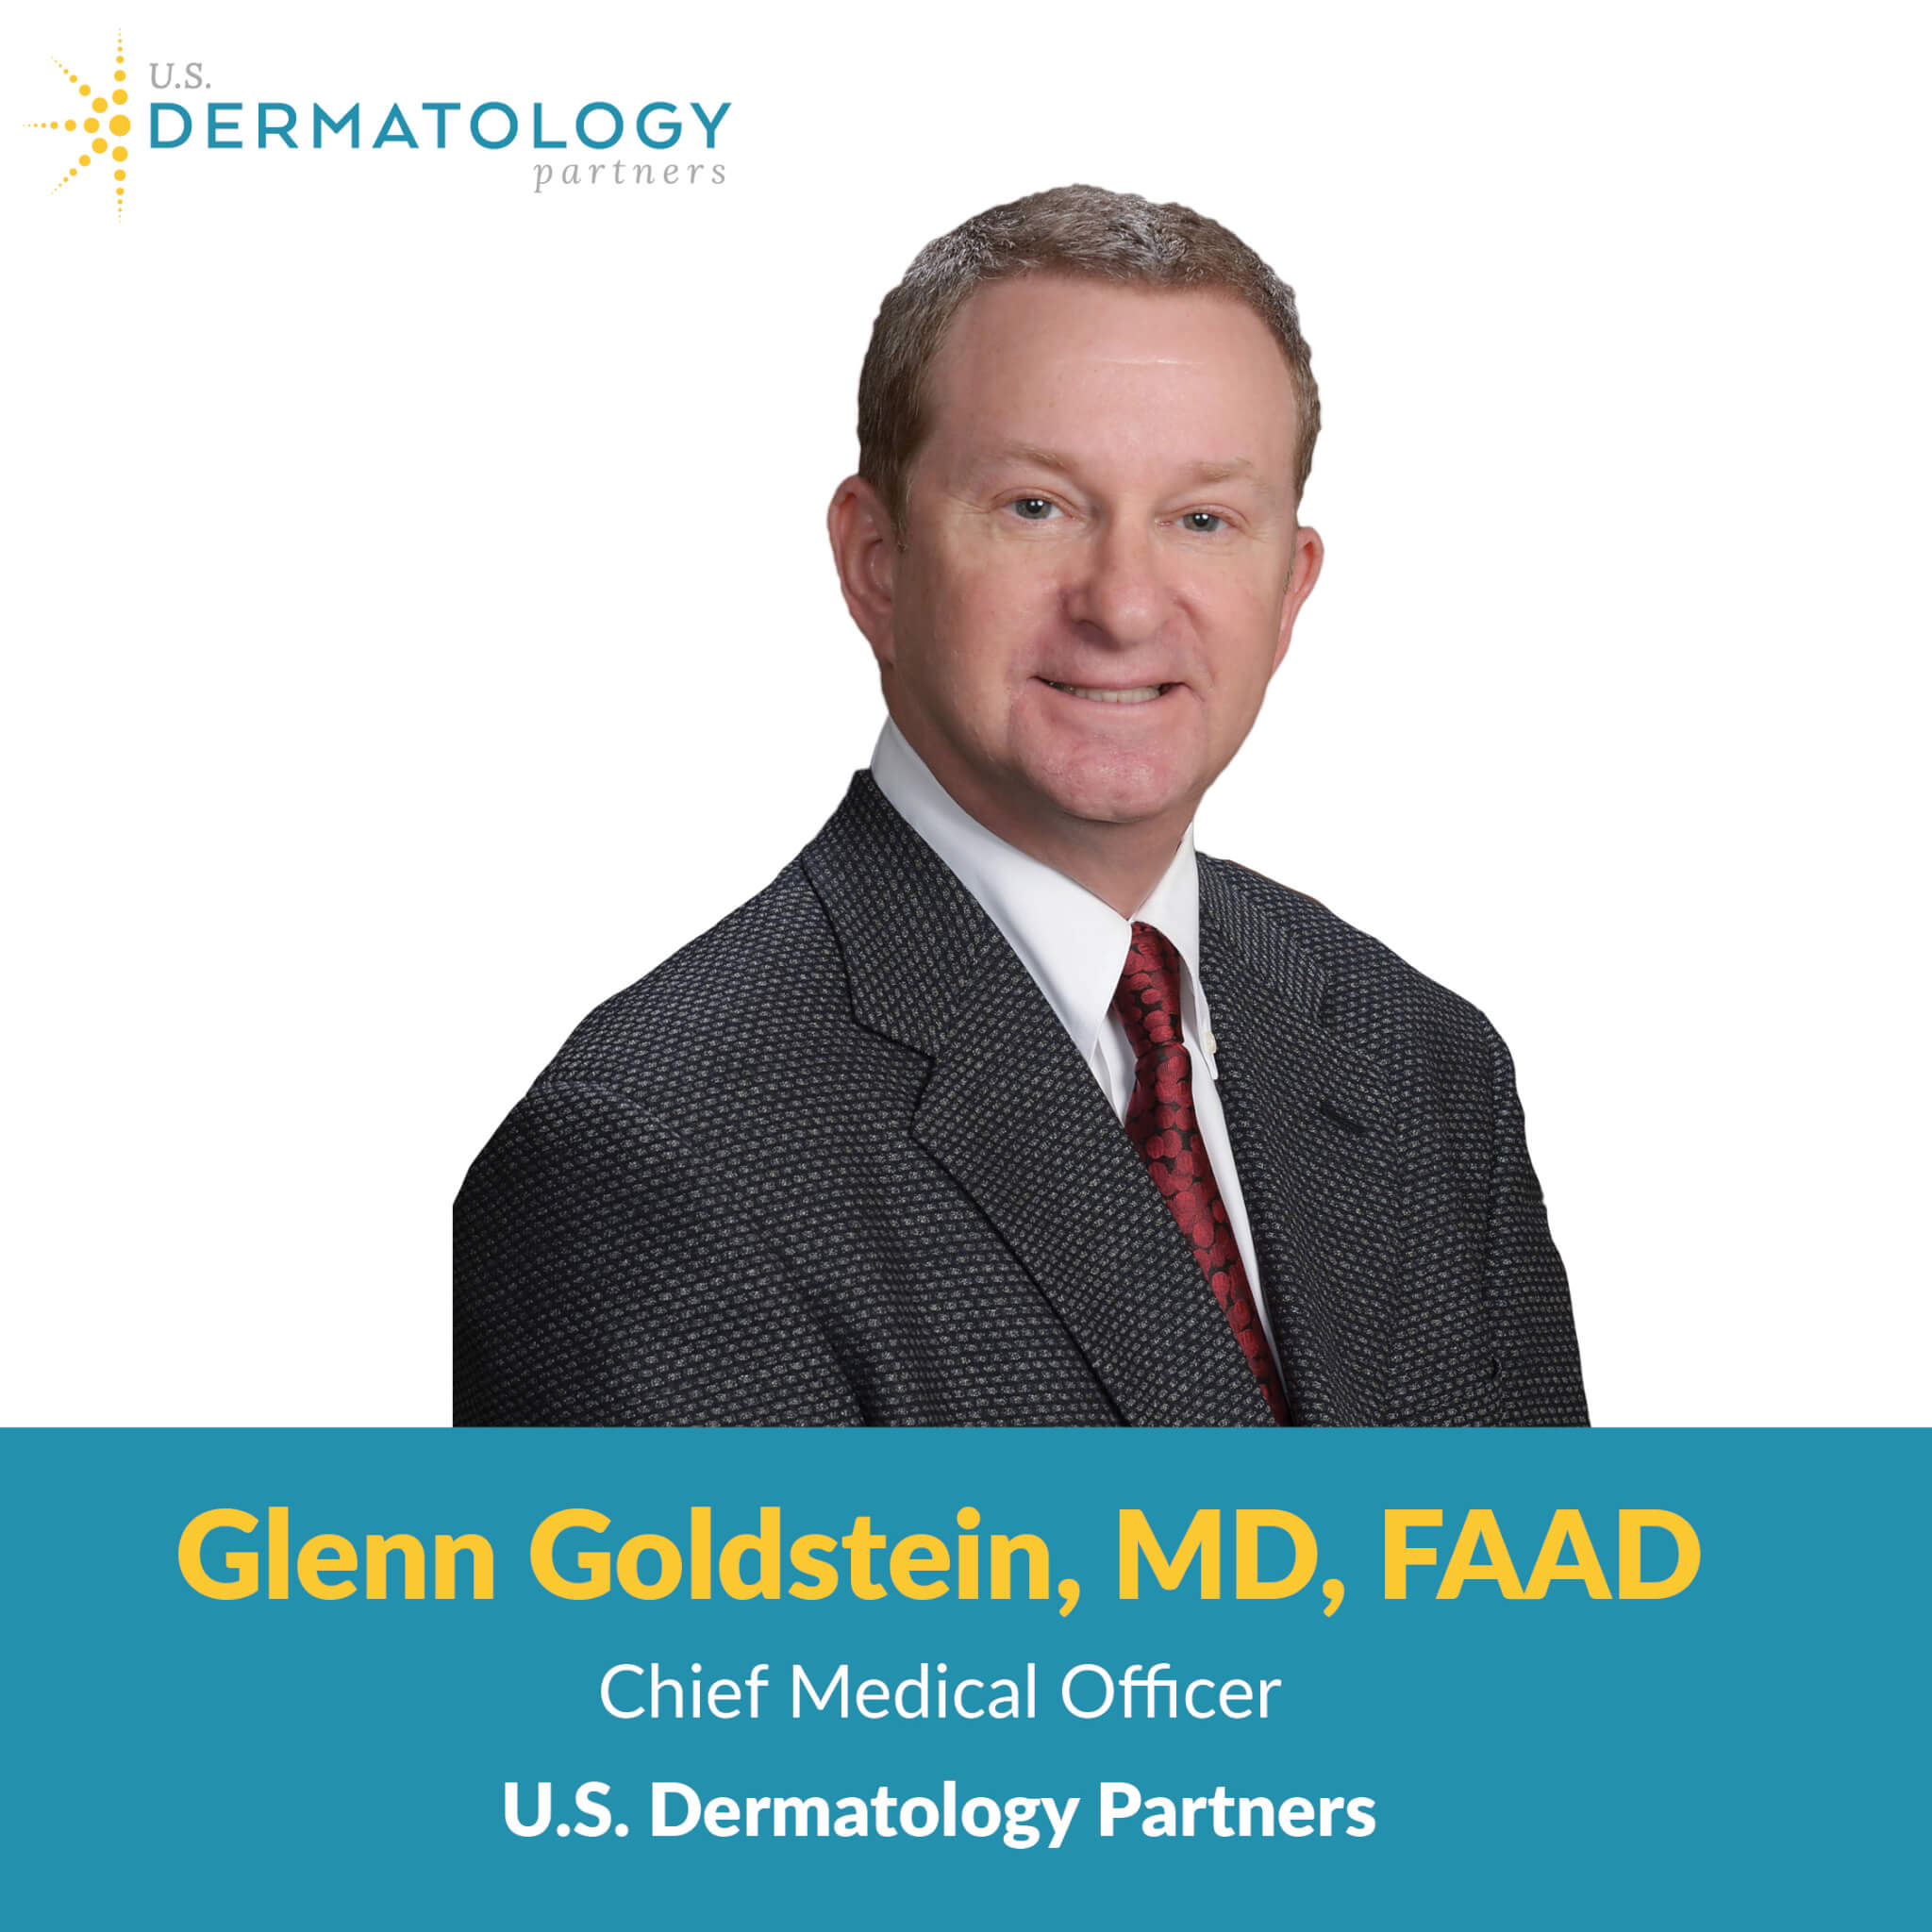 U.S. Dermatology Partners announced today the appointment of Dr. Glenn Goldstein as Chief Medical Officer (CMO).